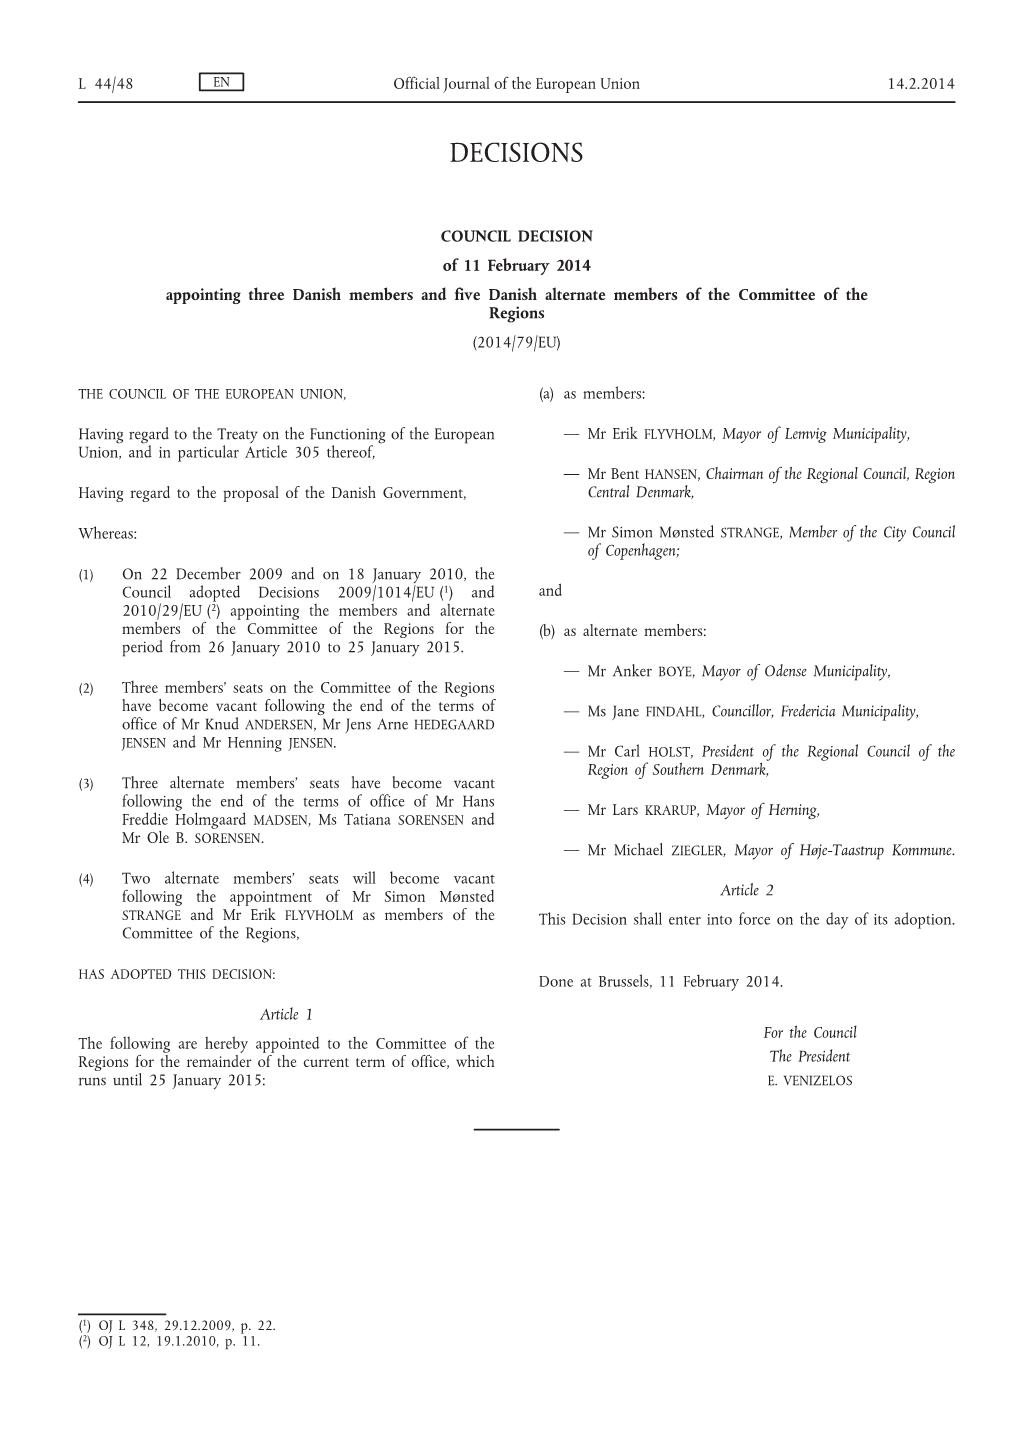 COUNCIL DECISION of 11 February 2014 Appointing Three Danish Members and Five Danish Alternate Members of the Committee of the Regions (2014/79/EU)